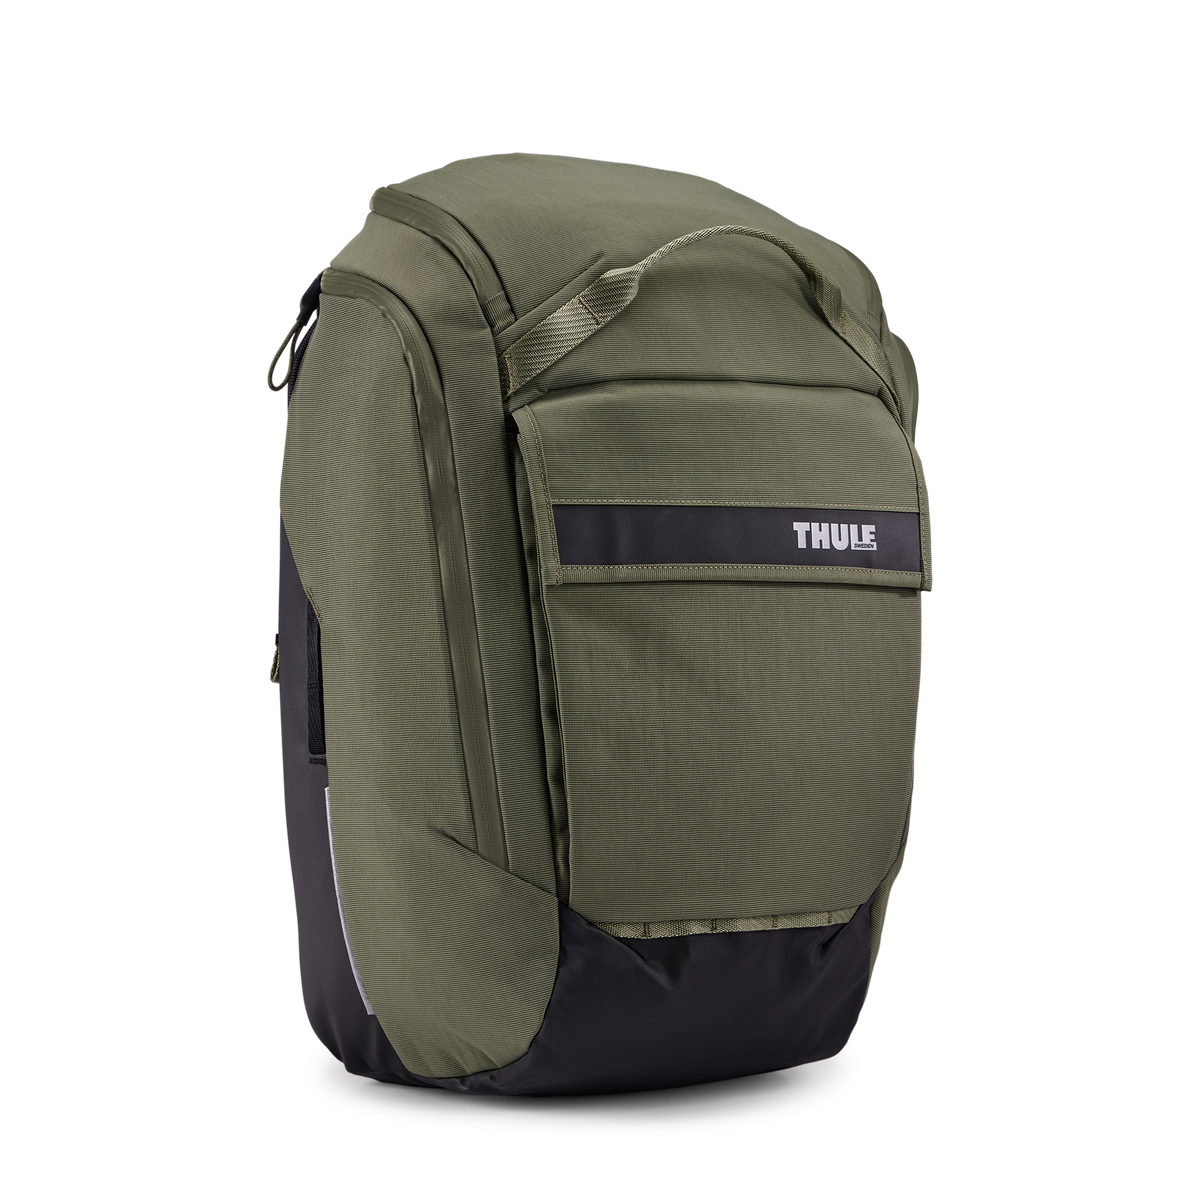 Thule Paramount hybrid bike pannier and backpack 26L green